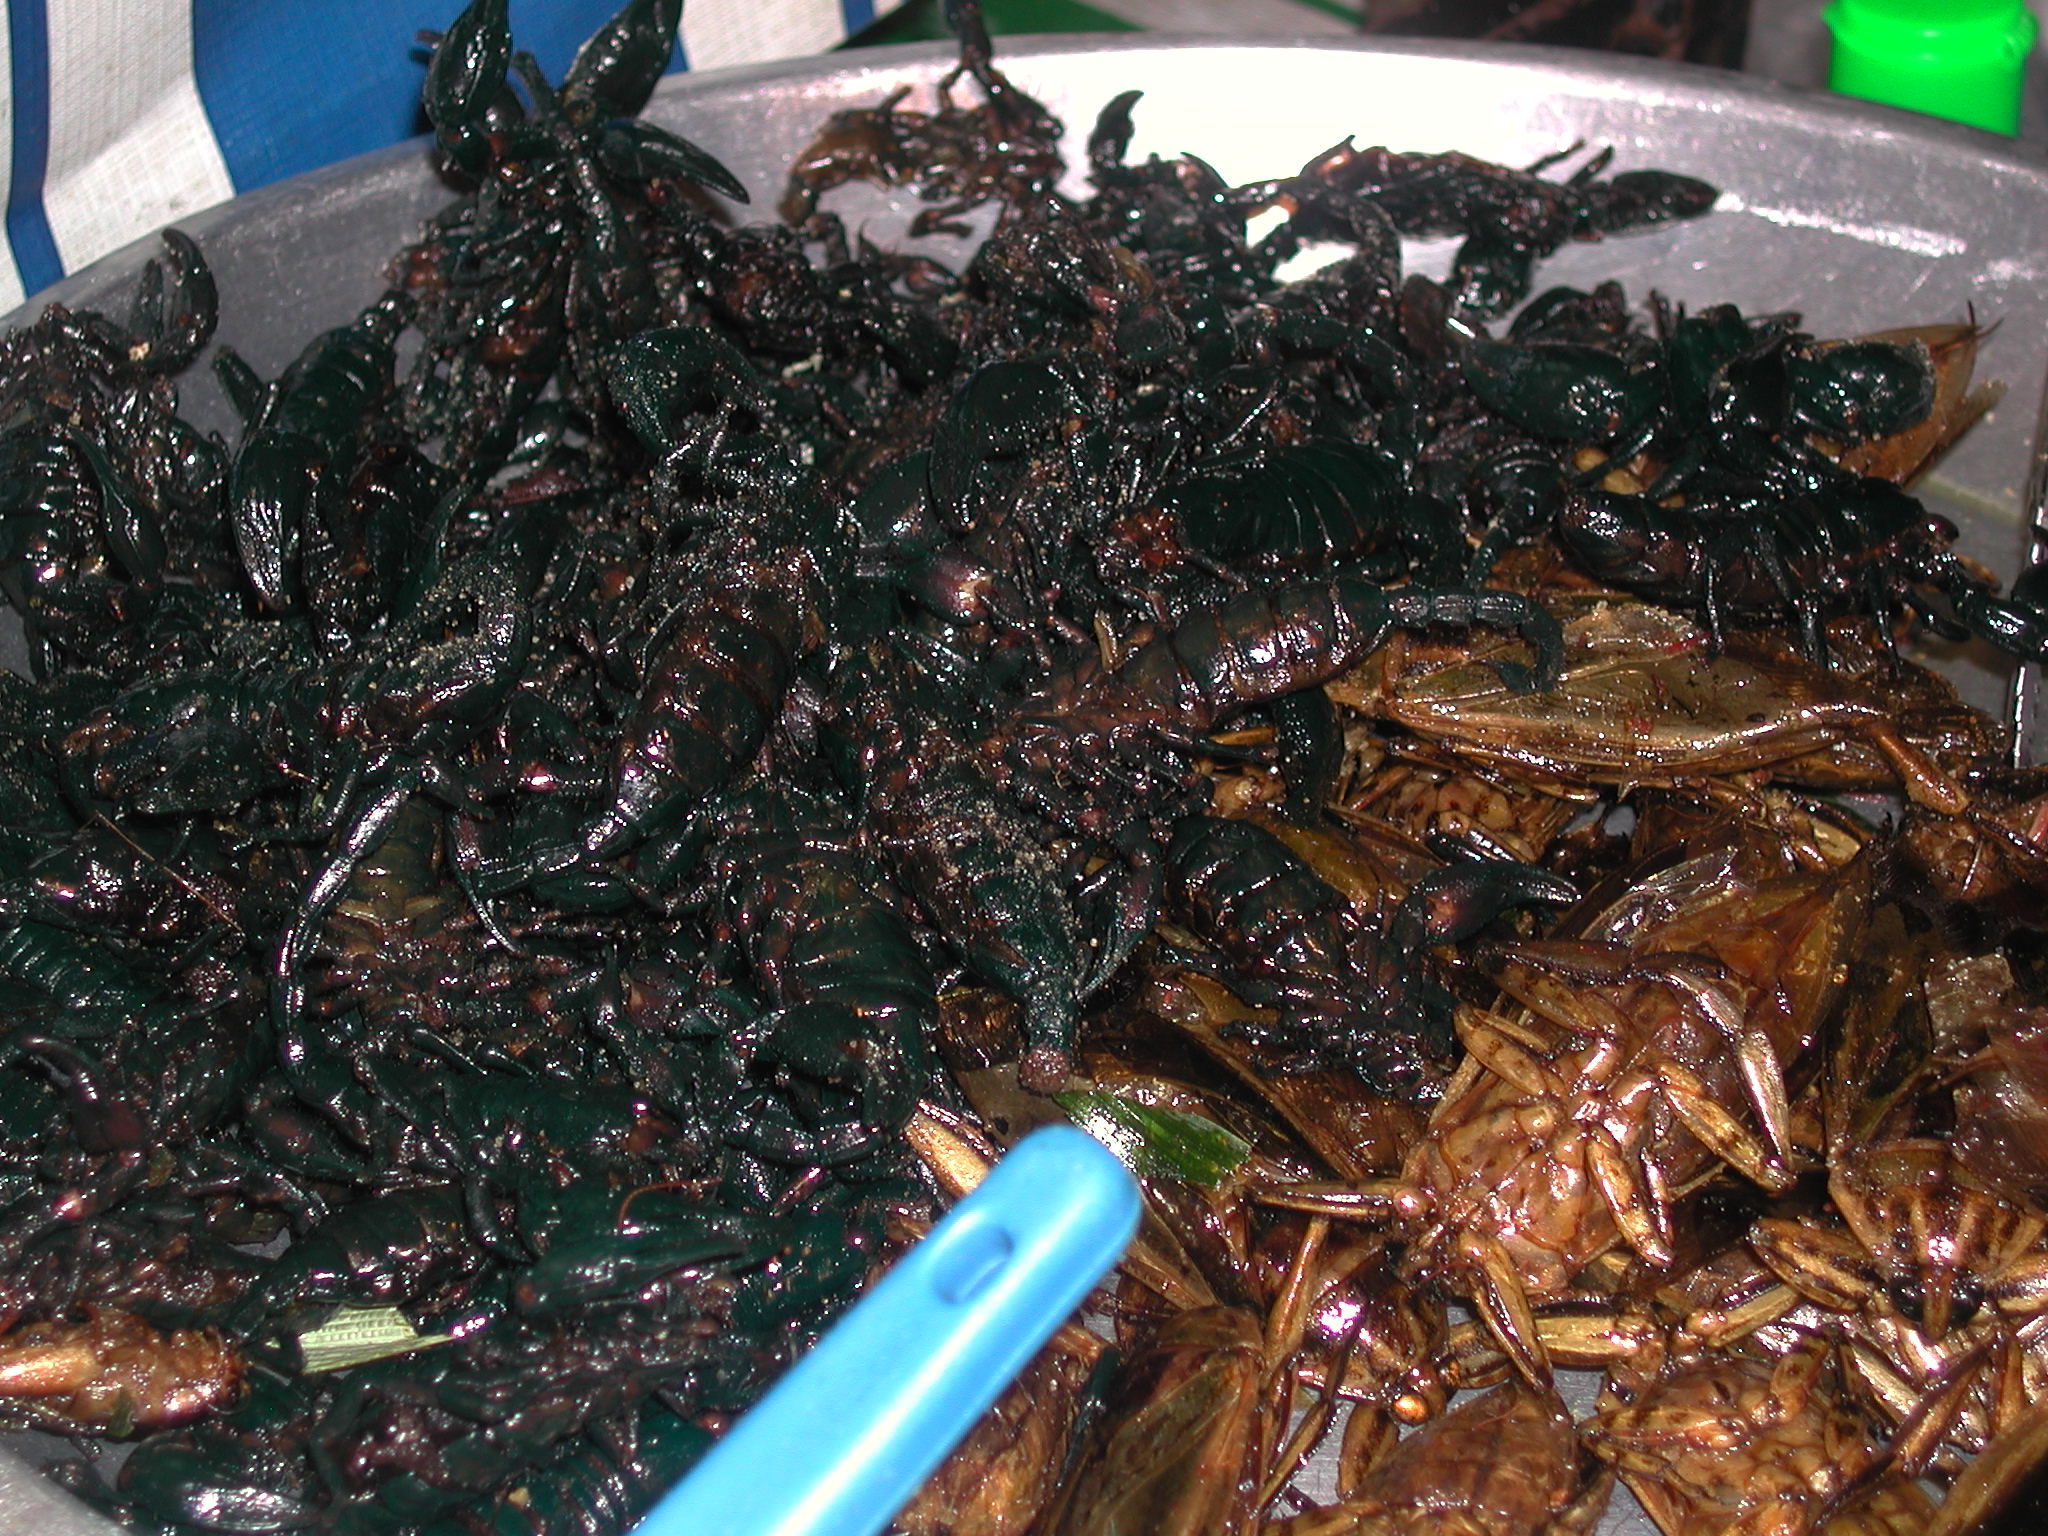 Fried Scorpions/Roaches